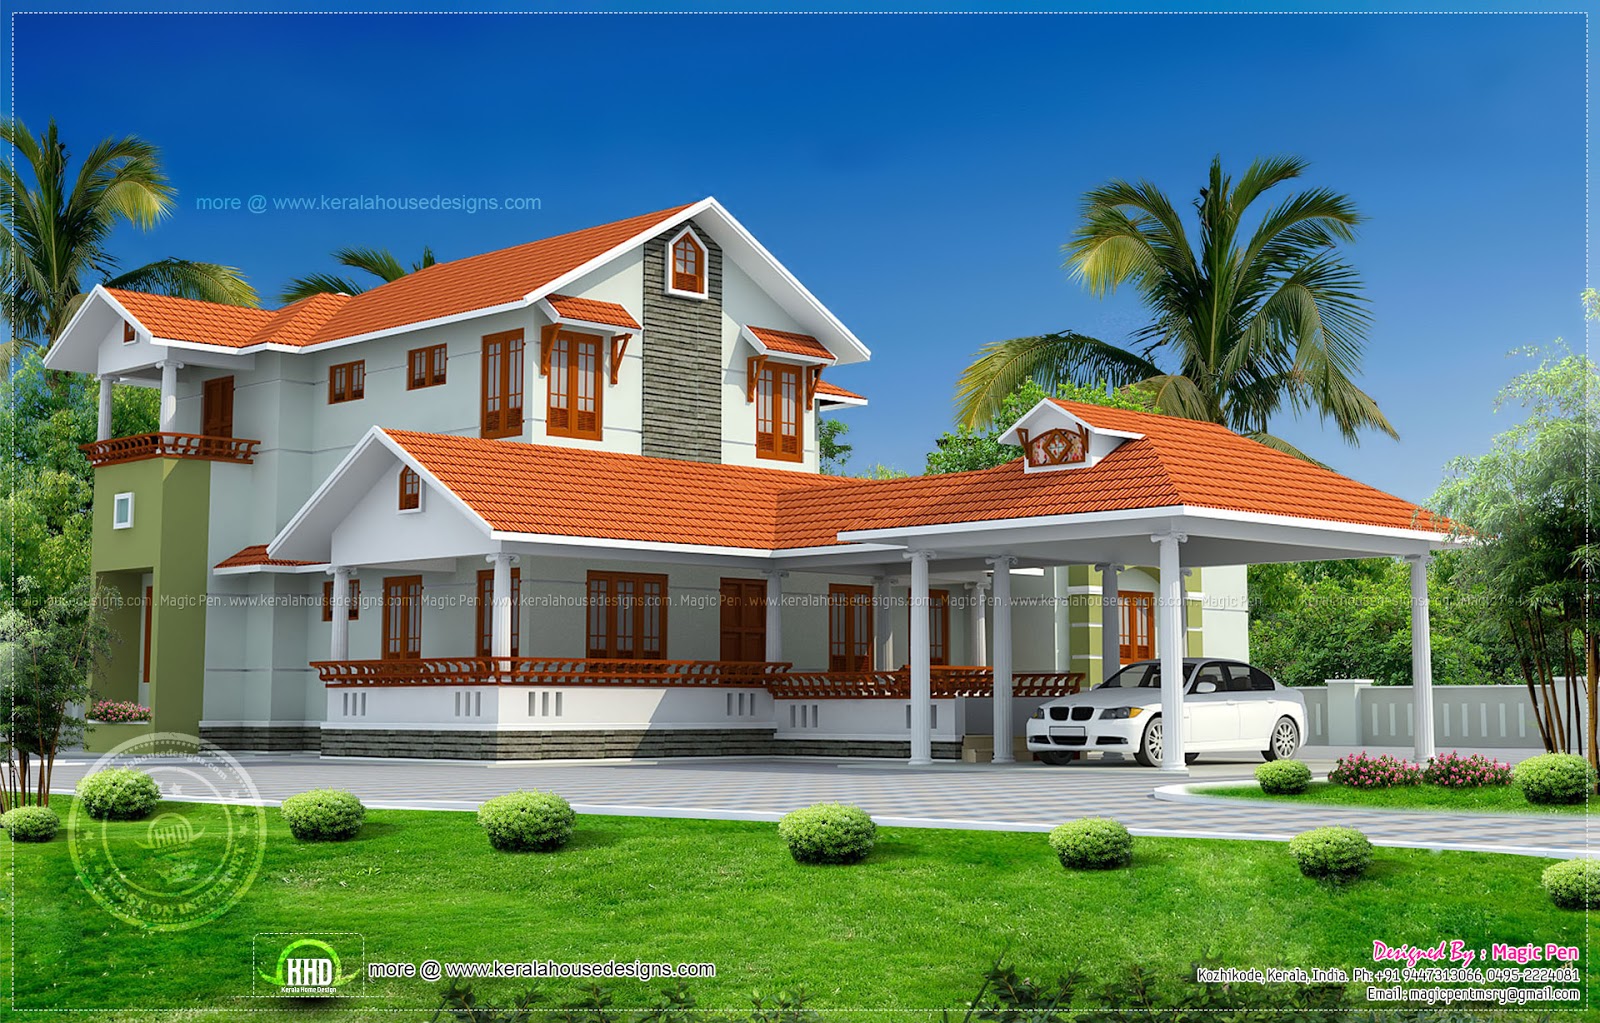 Kerala model double storied house - Kerala home design and floor plans